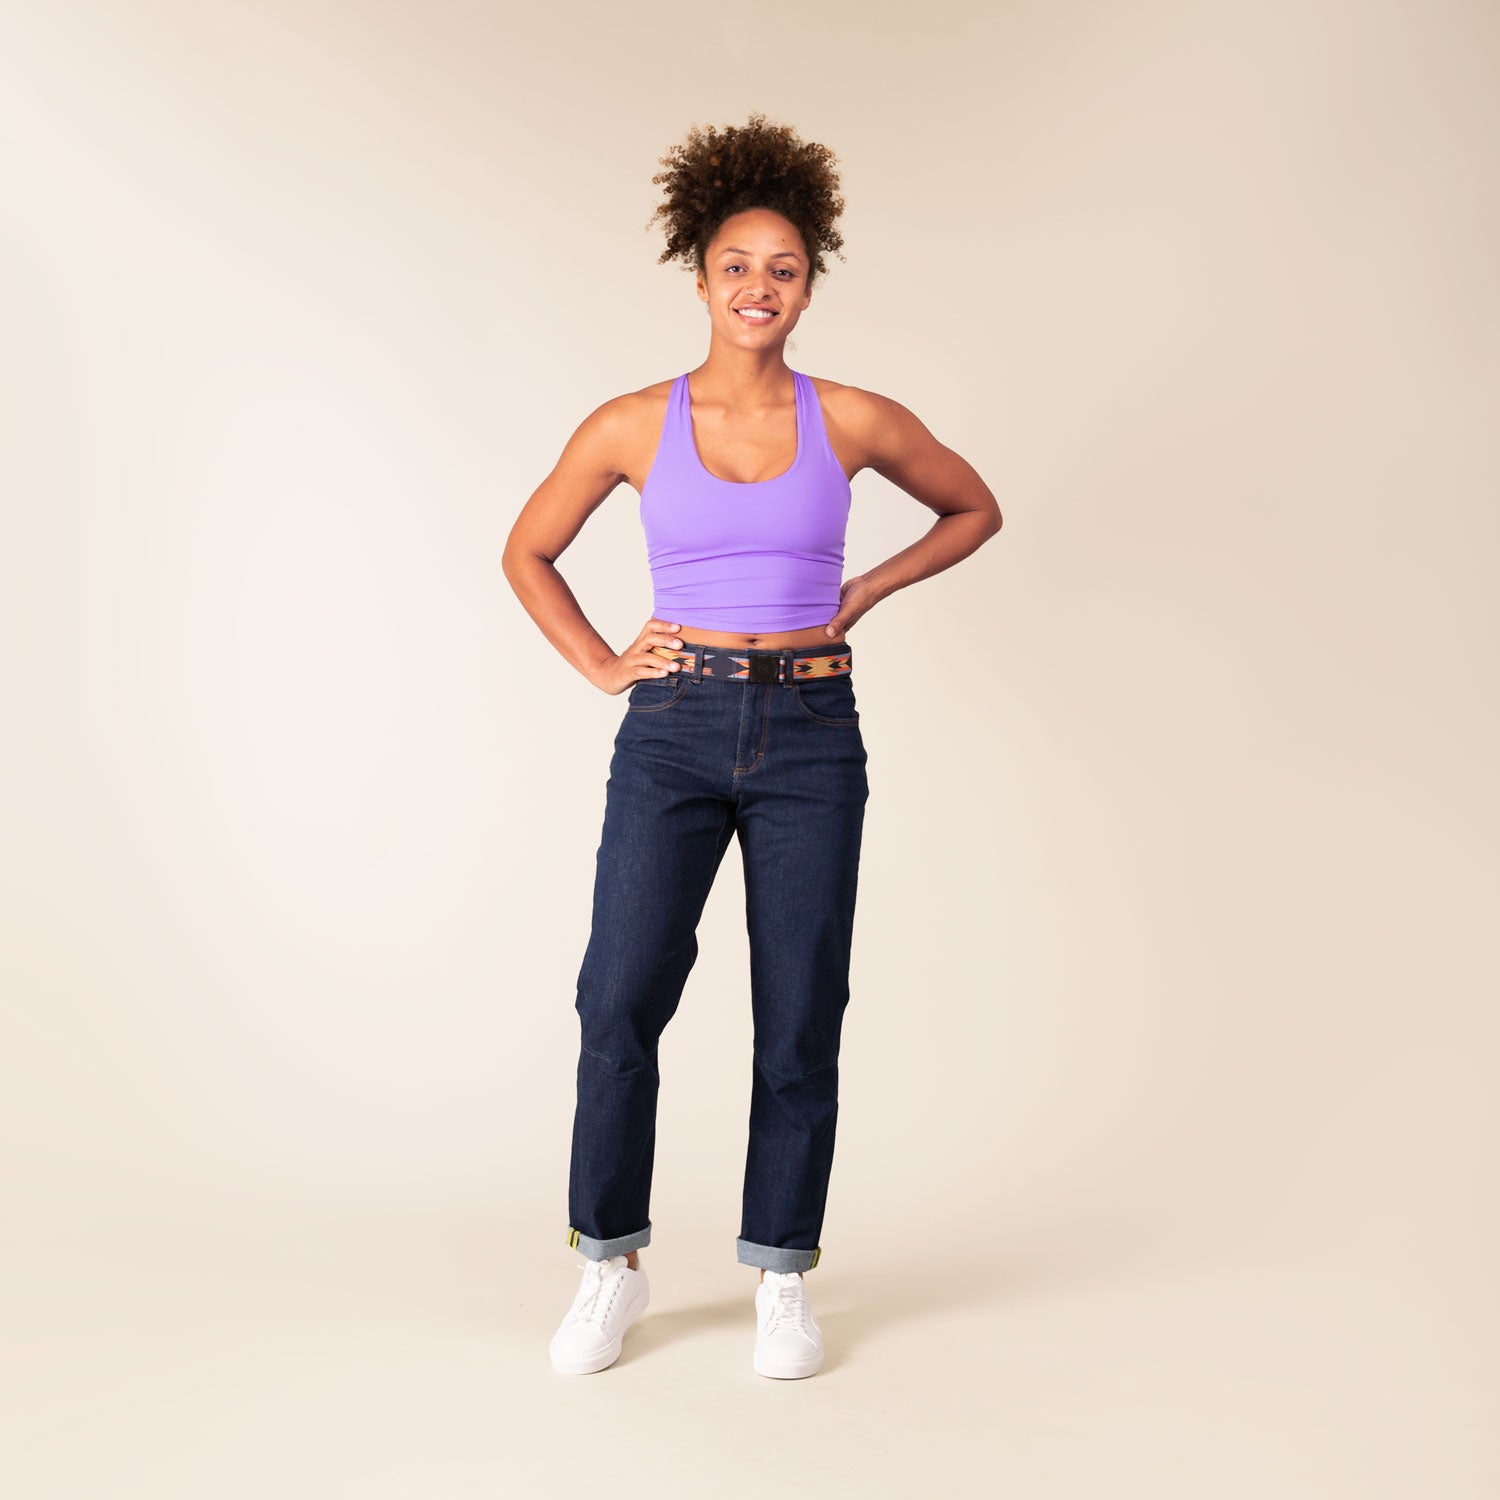 3RD ROCK Clothing Mars sustainable jeans - Kendal is 5ft 7" with a 28" waist, 38" hips and wears a size 30/RL. F